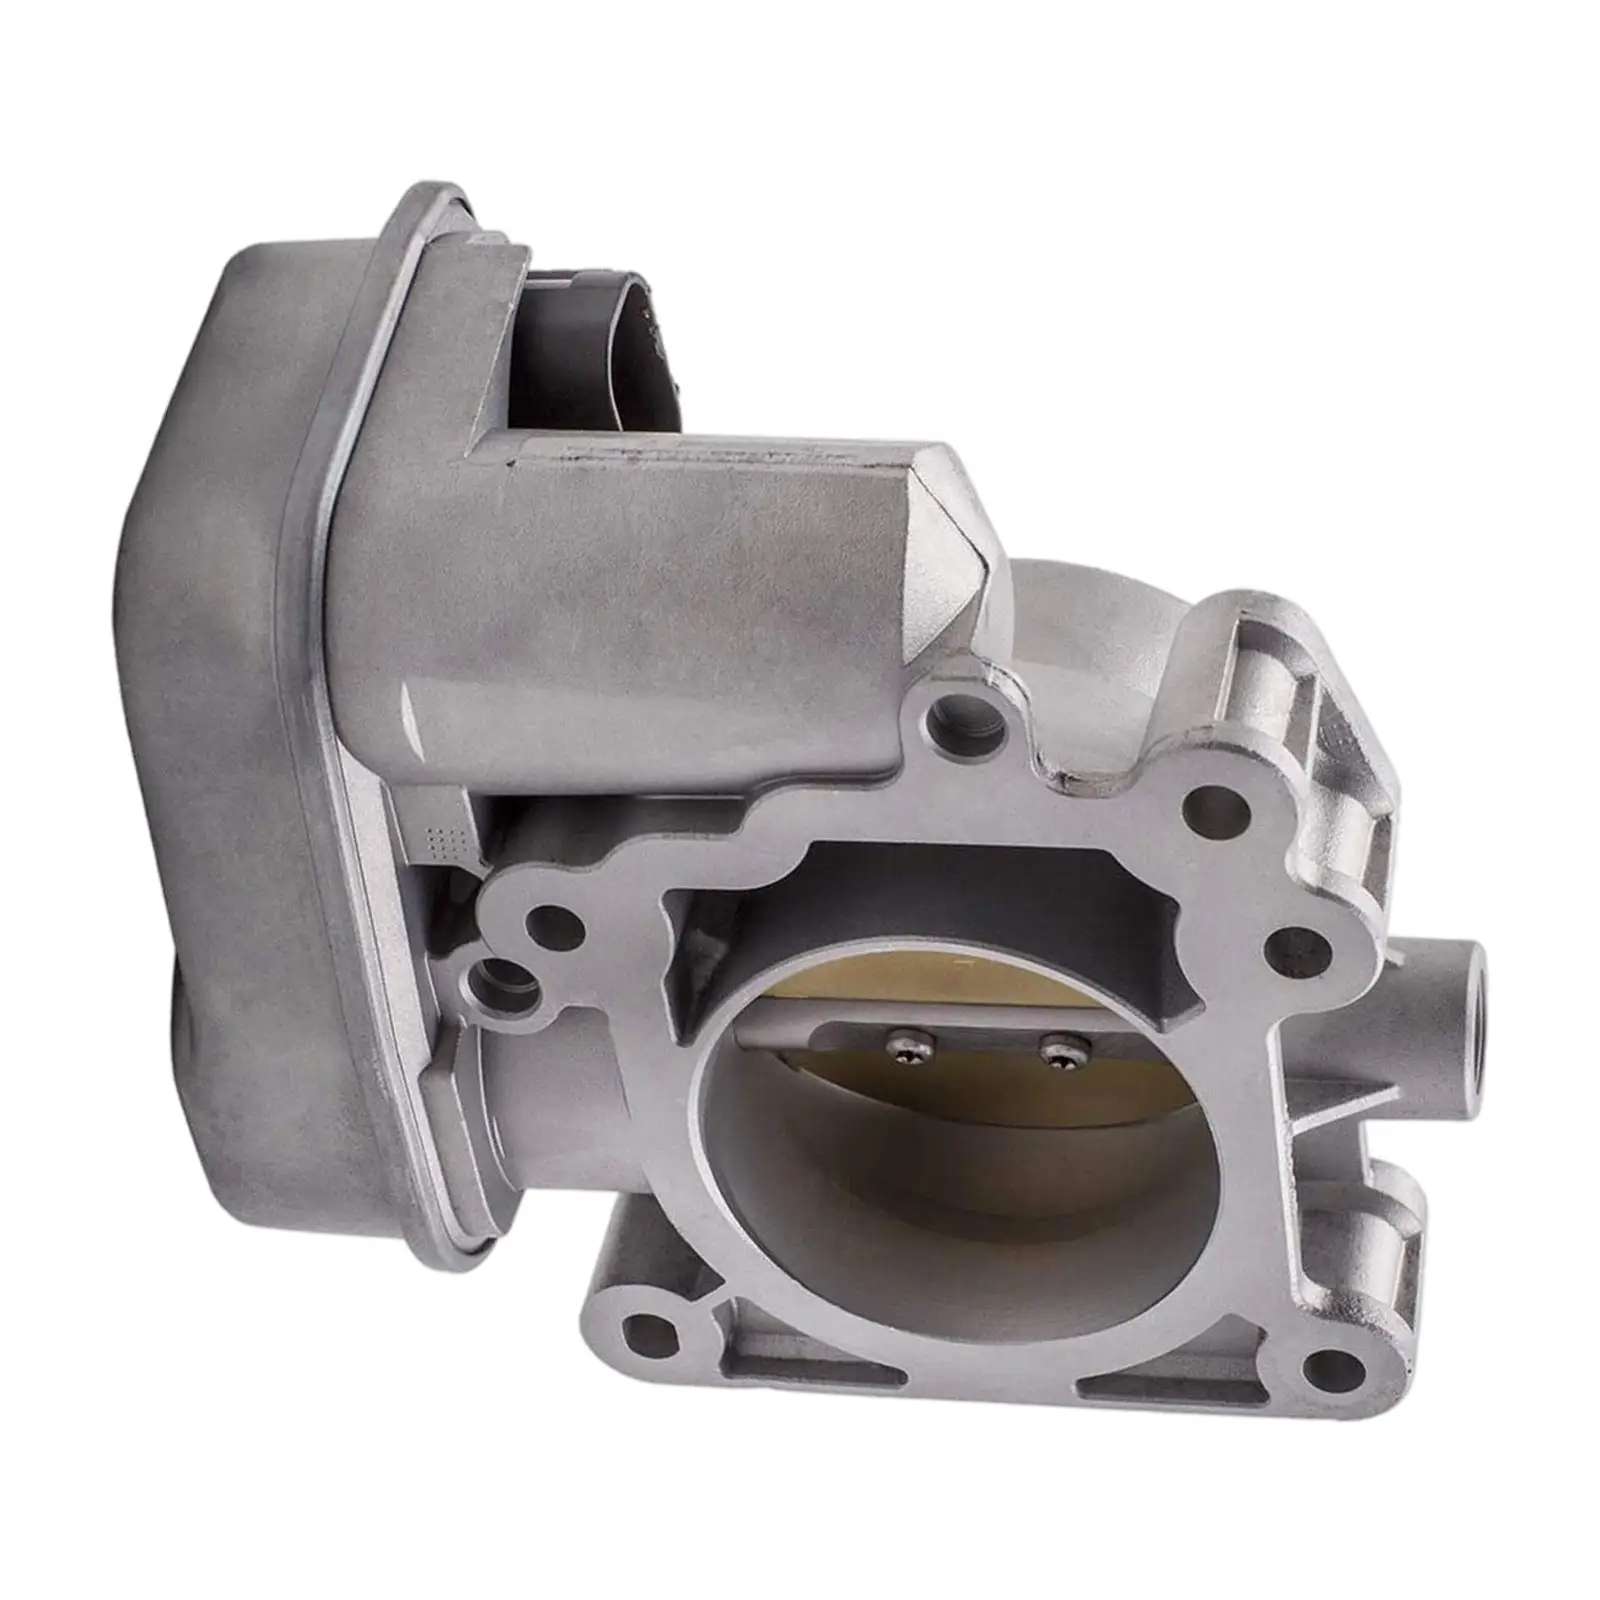 Throttle Body Aembly Fit for  HHR 1ST L4 2.2L 2006 12568796 Mounding